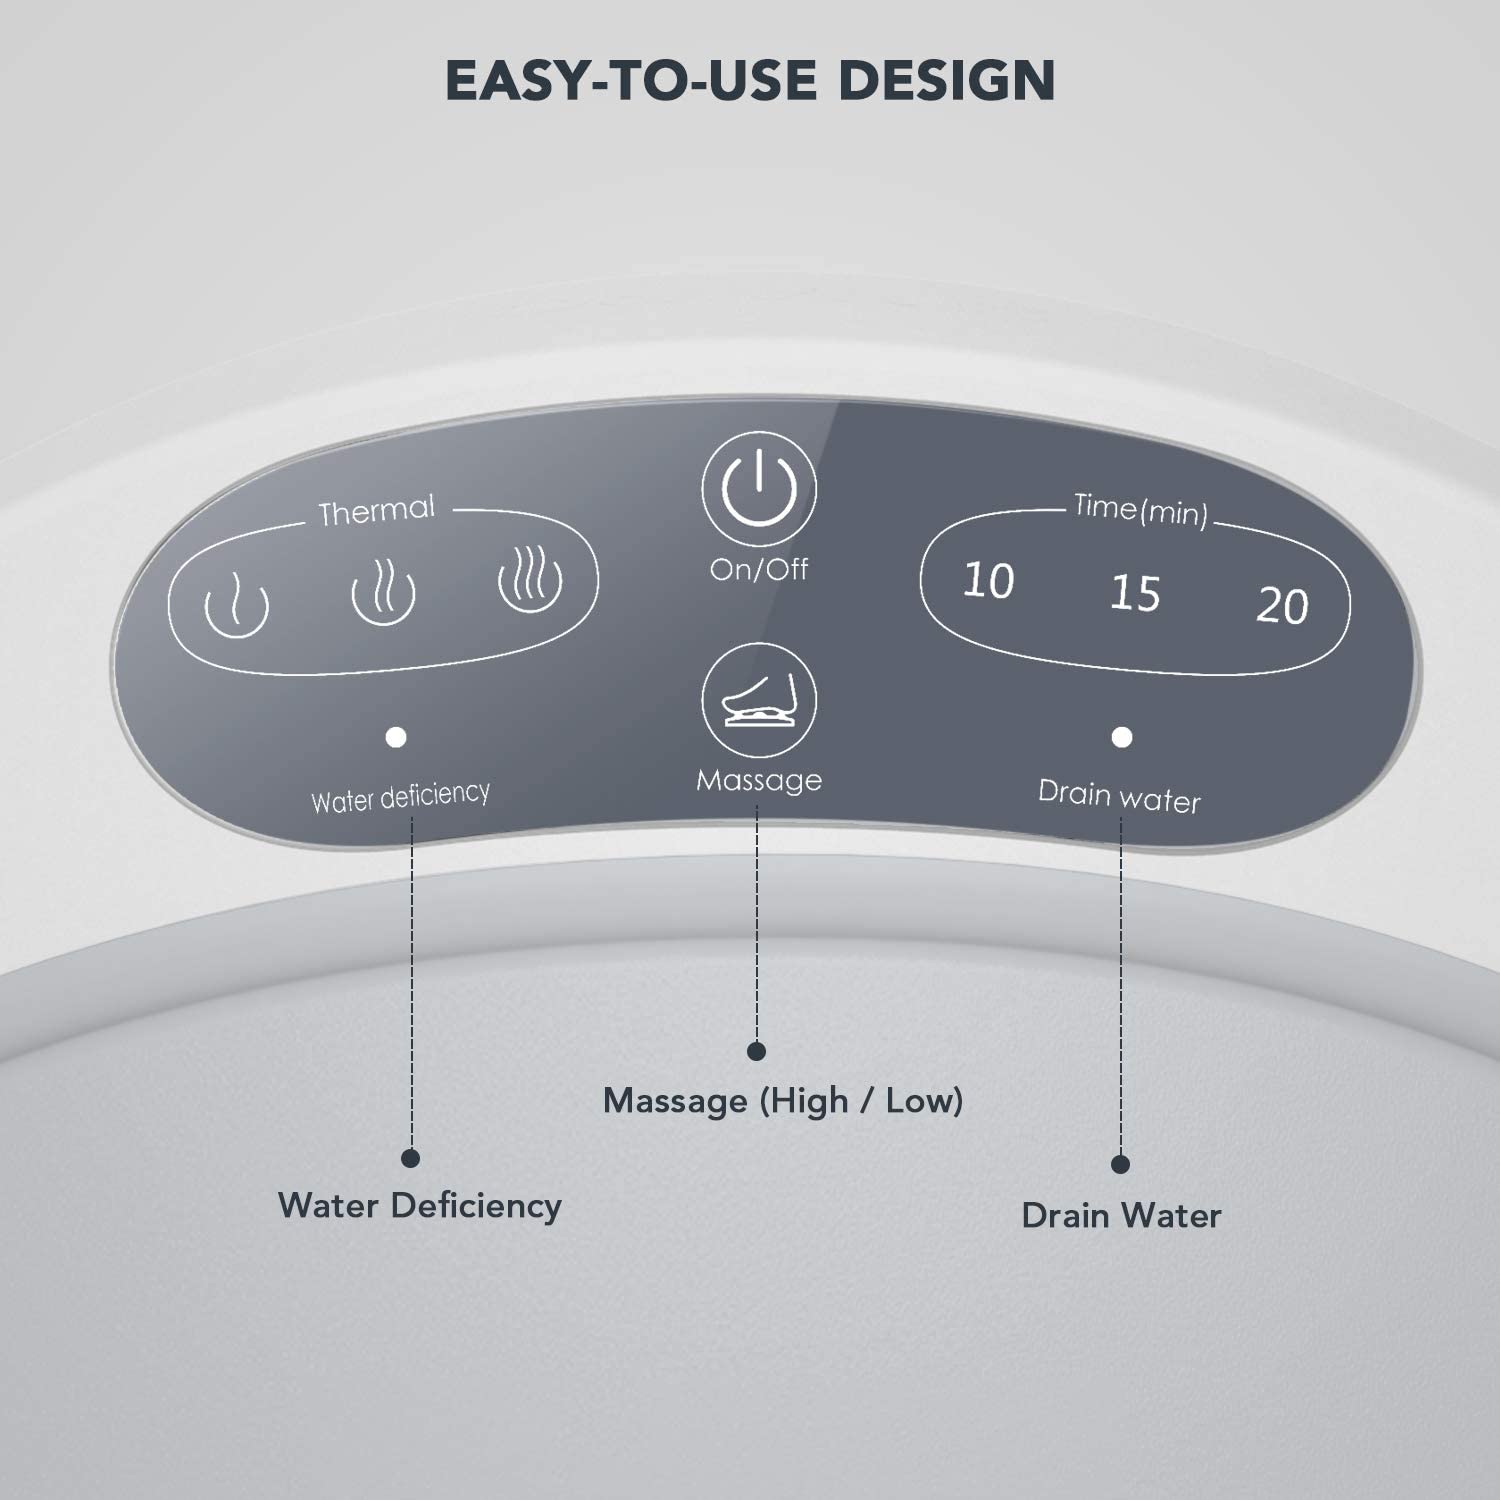 Load image into Gallery viewer, oFlexiSpa Steam Foot Spa Bath Massager with Electric Rollers, 3 Heating Levels and 2 Intensities for Feet Reflexology, 3 Adjustable Timers, Soothe Tired Feet, Water Saving Technology for Home Use - NAIPO
